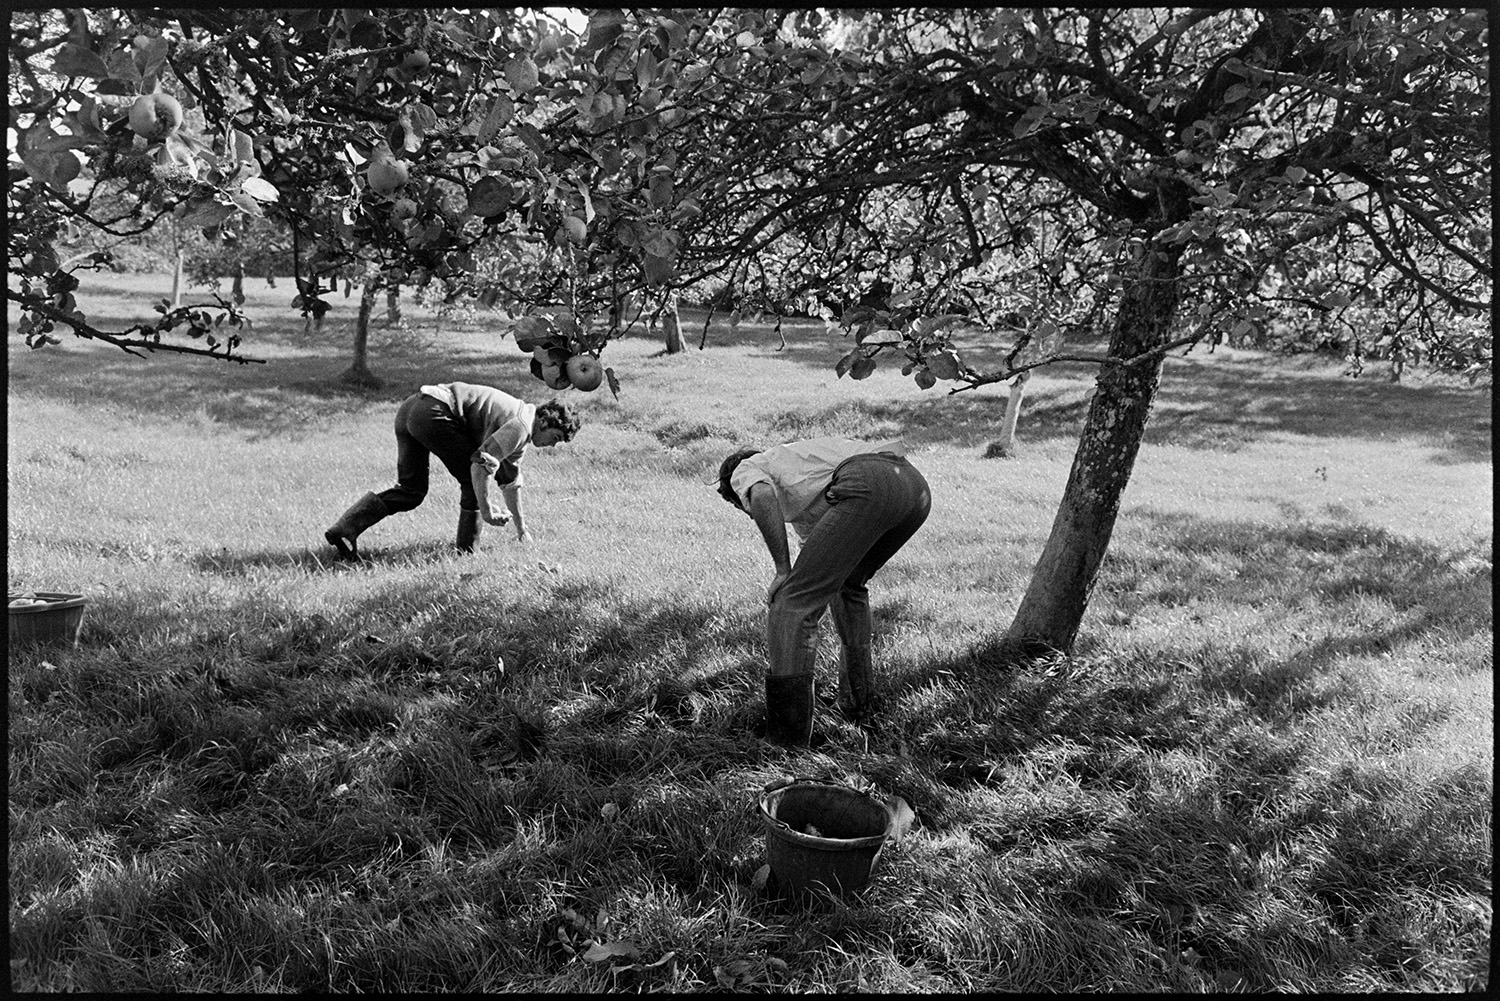 Men picking cider apples. 
[Graham Ward and David Ward picking fallen apples off the ground in a cider orchard at Parsonage, Iddesleigh. A bucket with apples is in the foreground.]